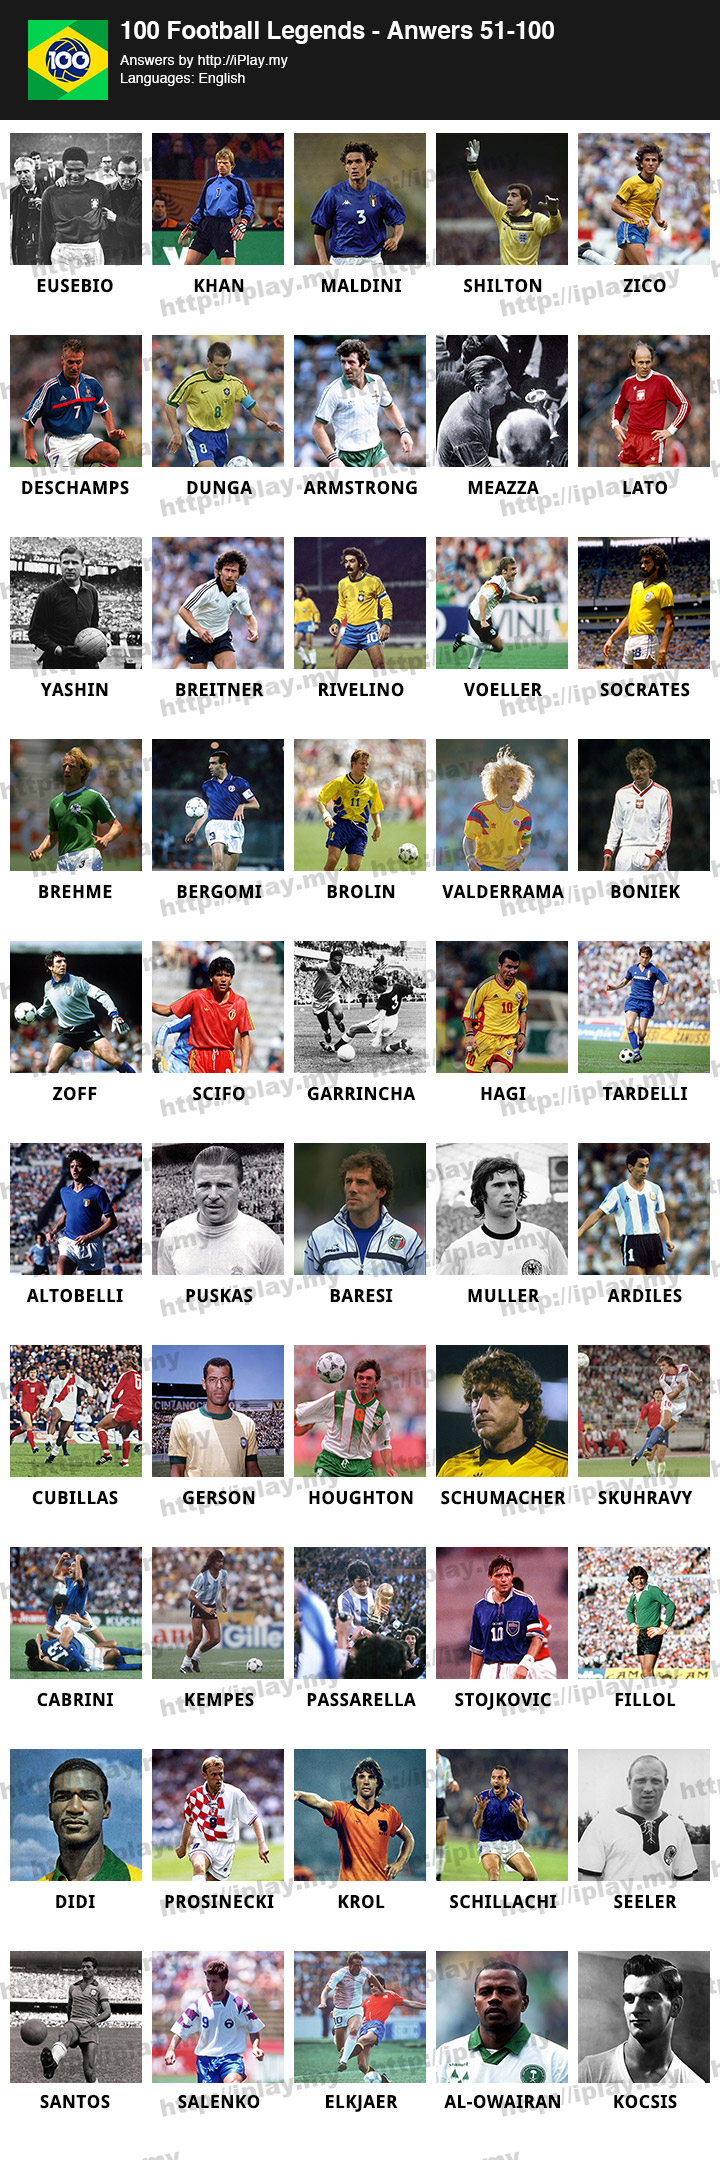 100-Football-Legends-Answers-51-100